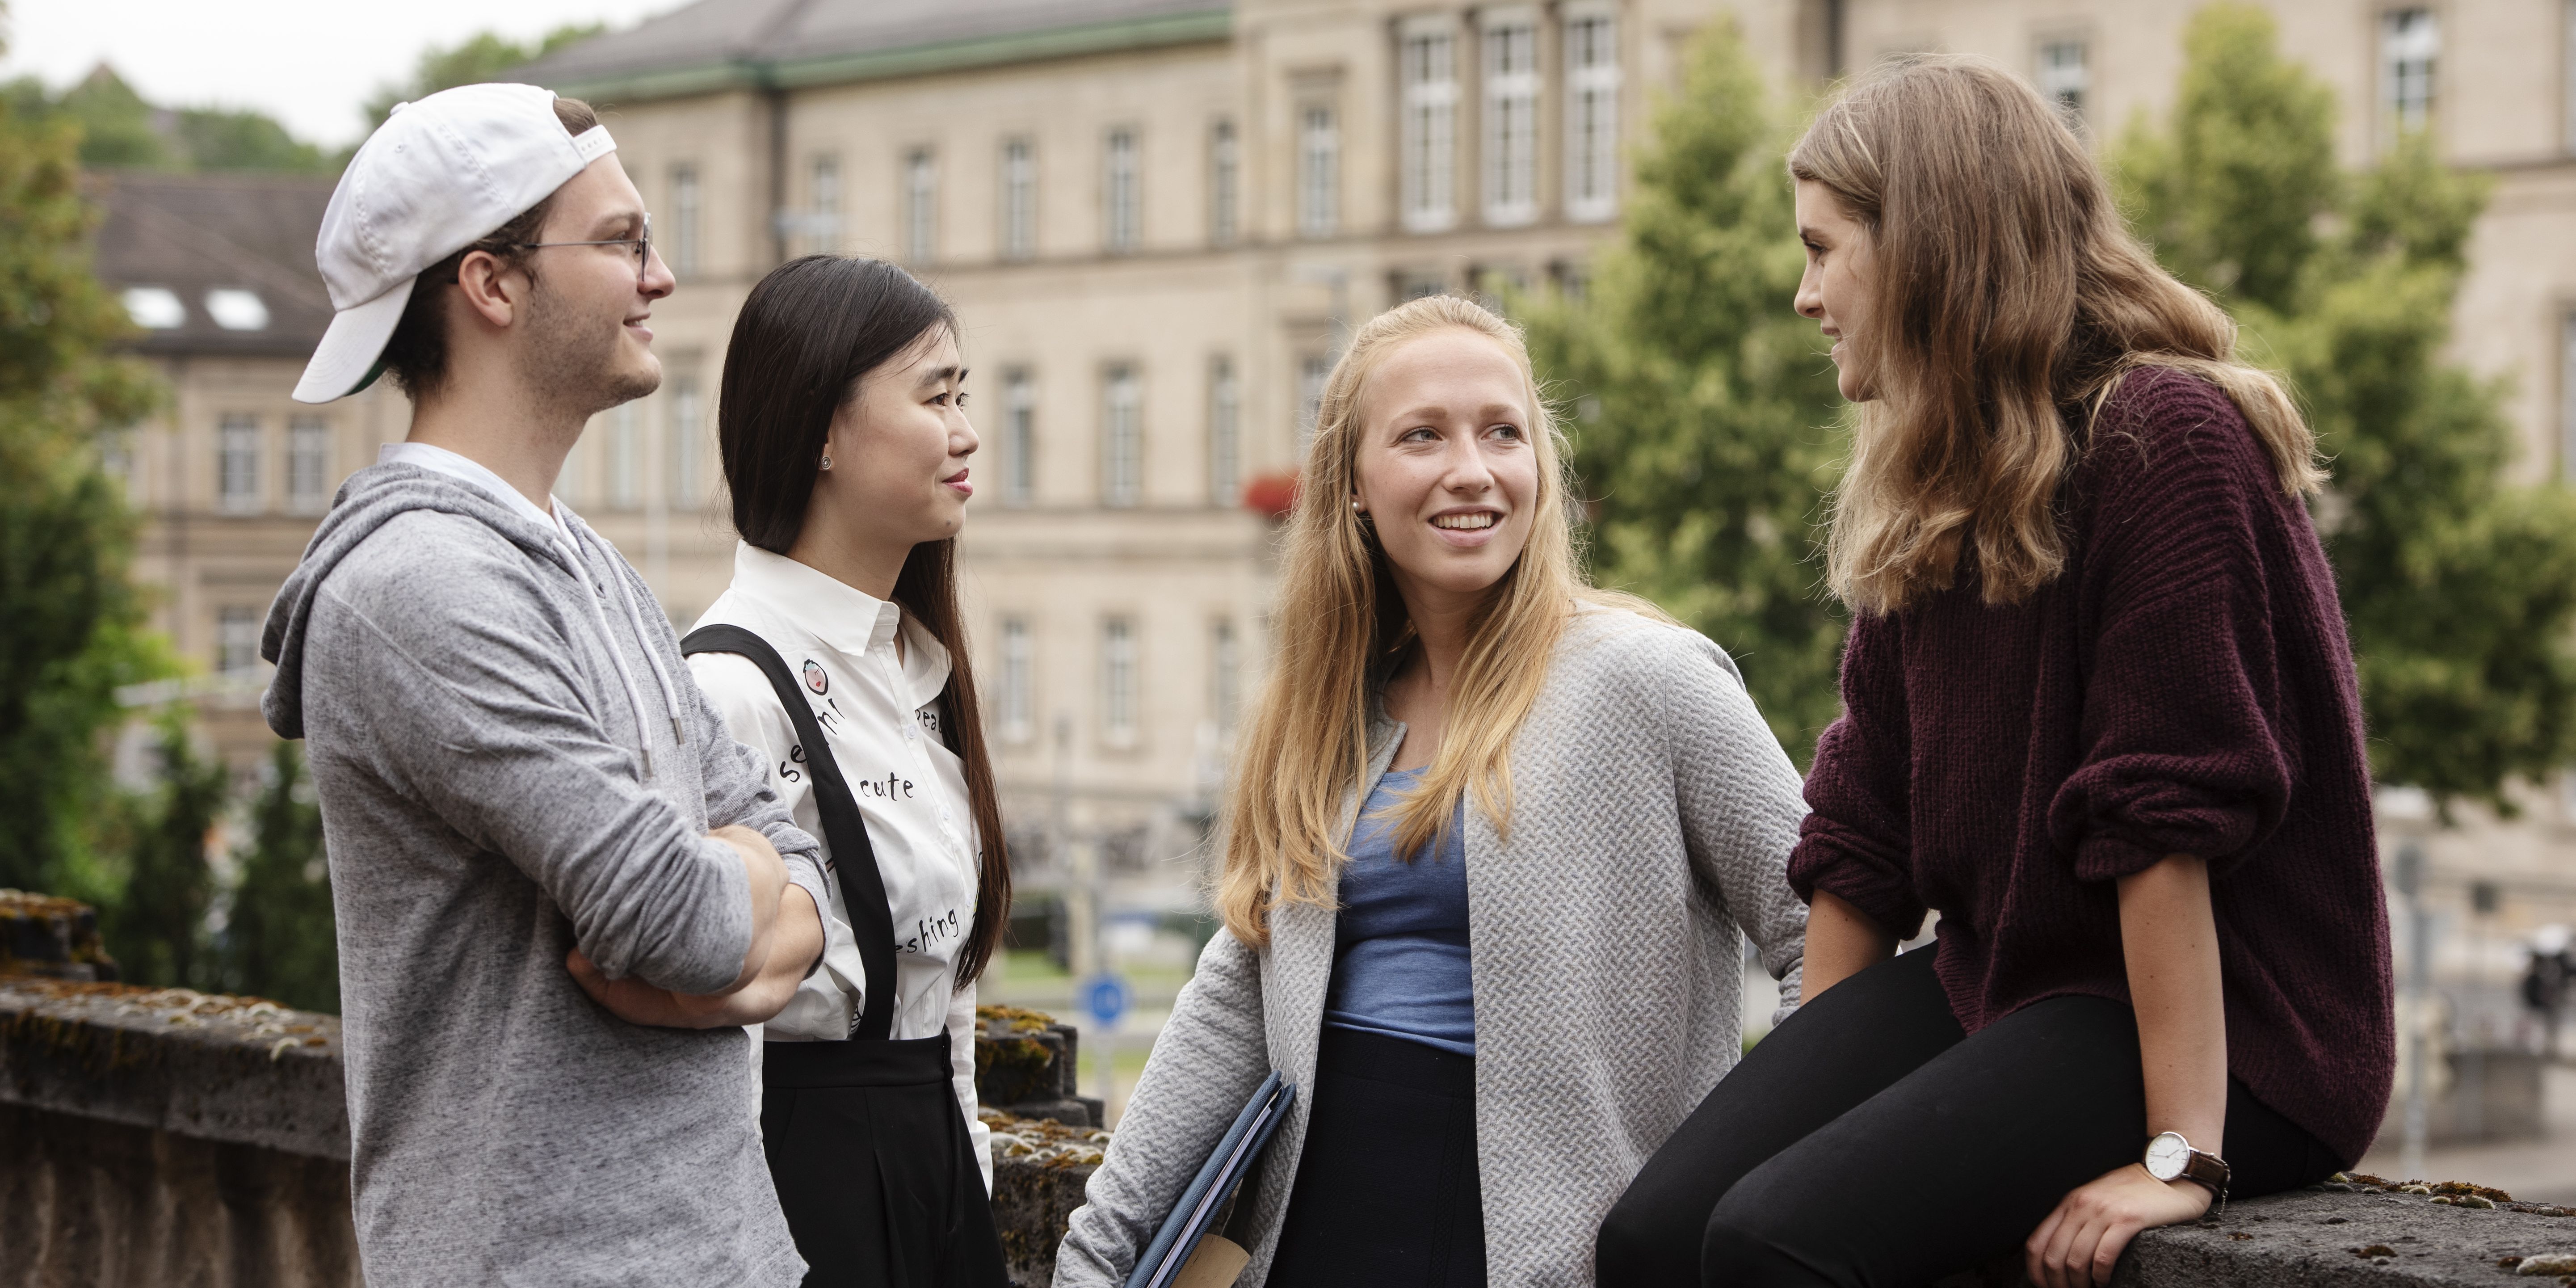 Students in conversation in front of the Neue Aula building